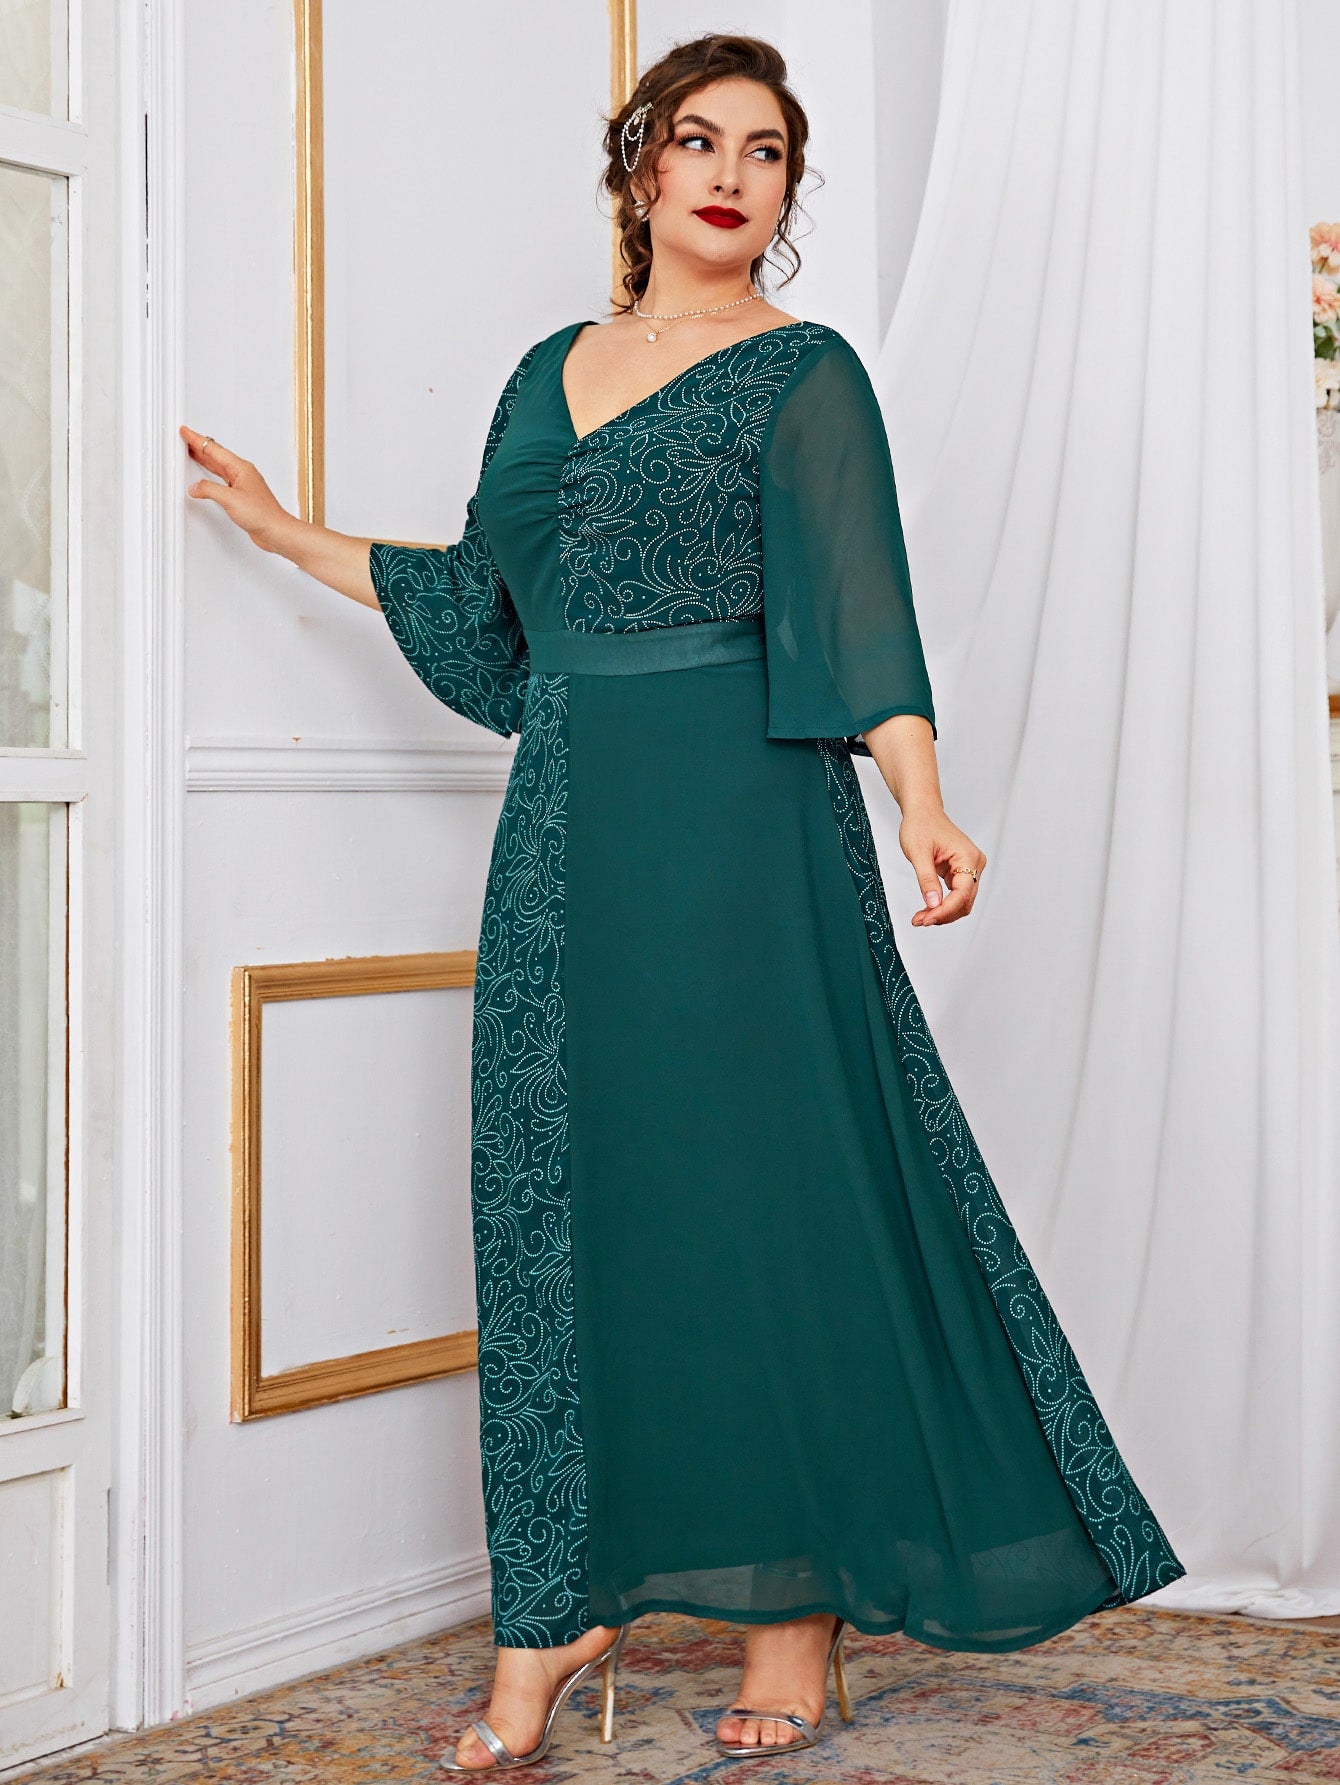 Aovica  Women Plus Size Large Maxi Dresses 2022 Spring Green Long Casual Elegant Evening Party Oversized Muslim Festival Clothing